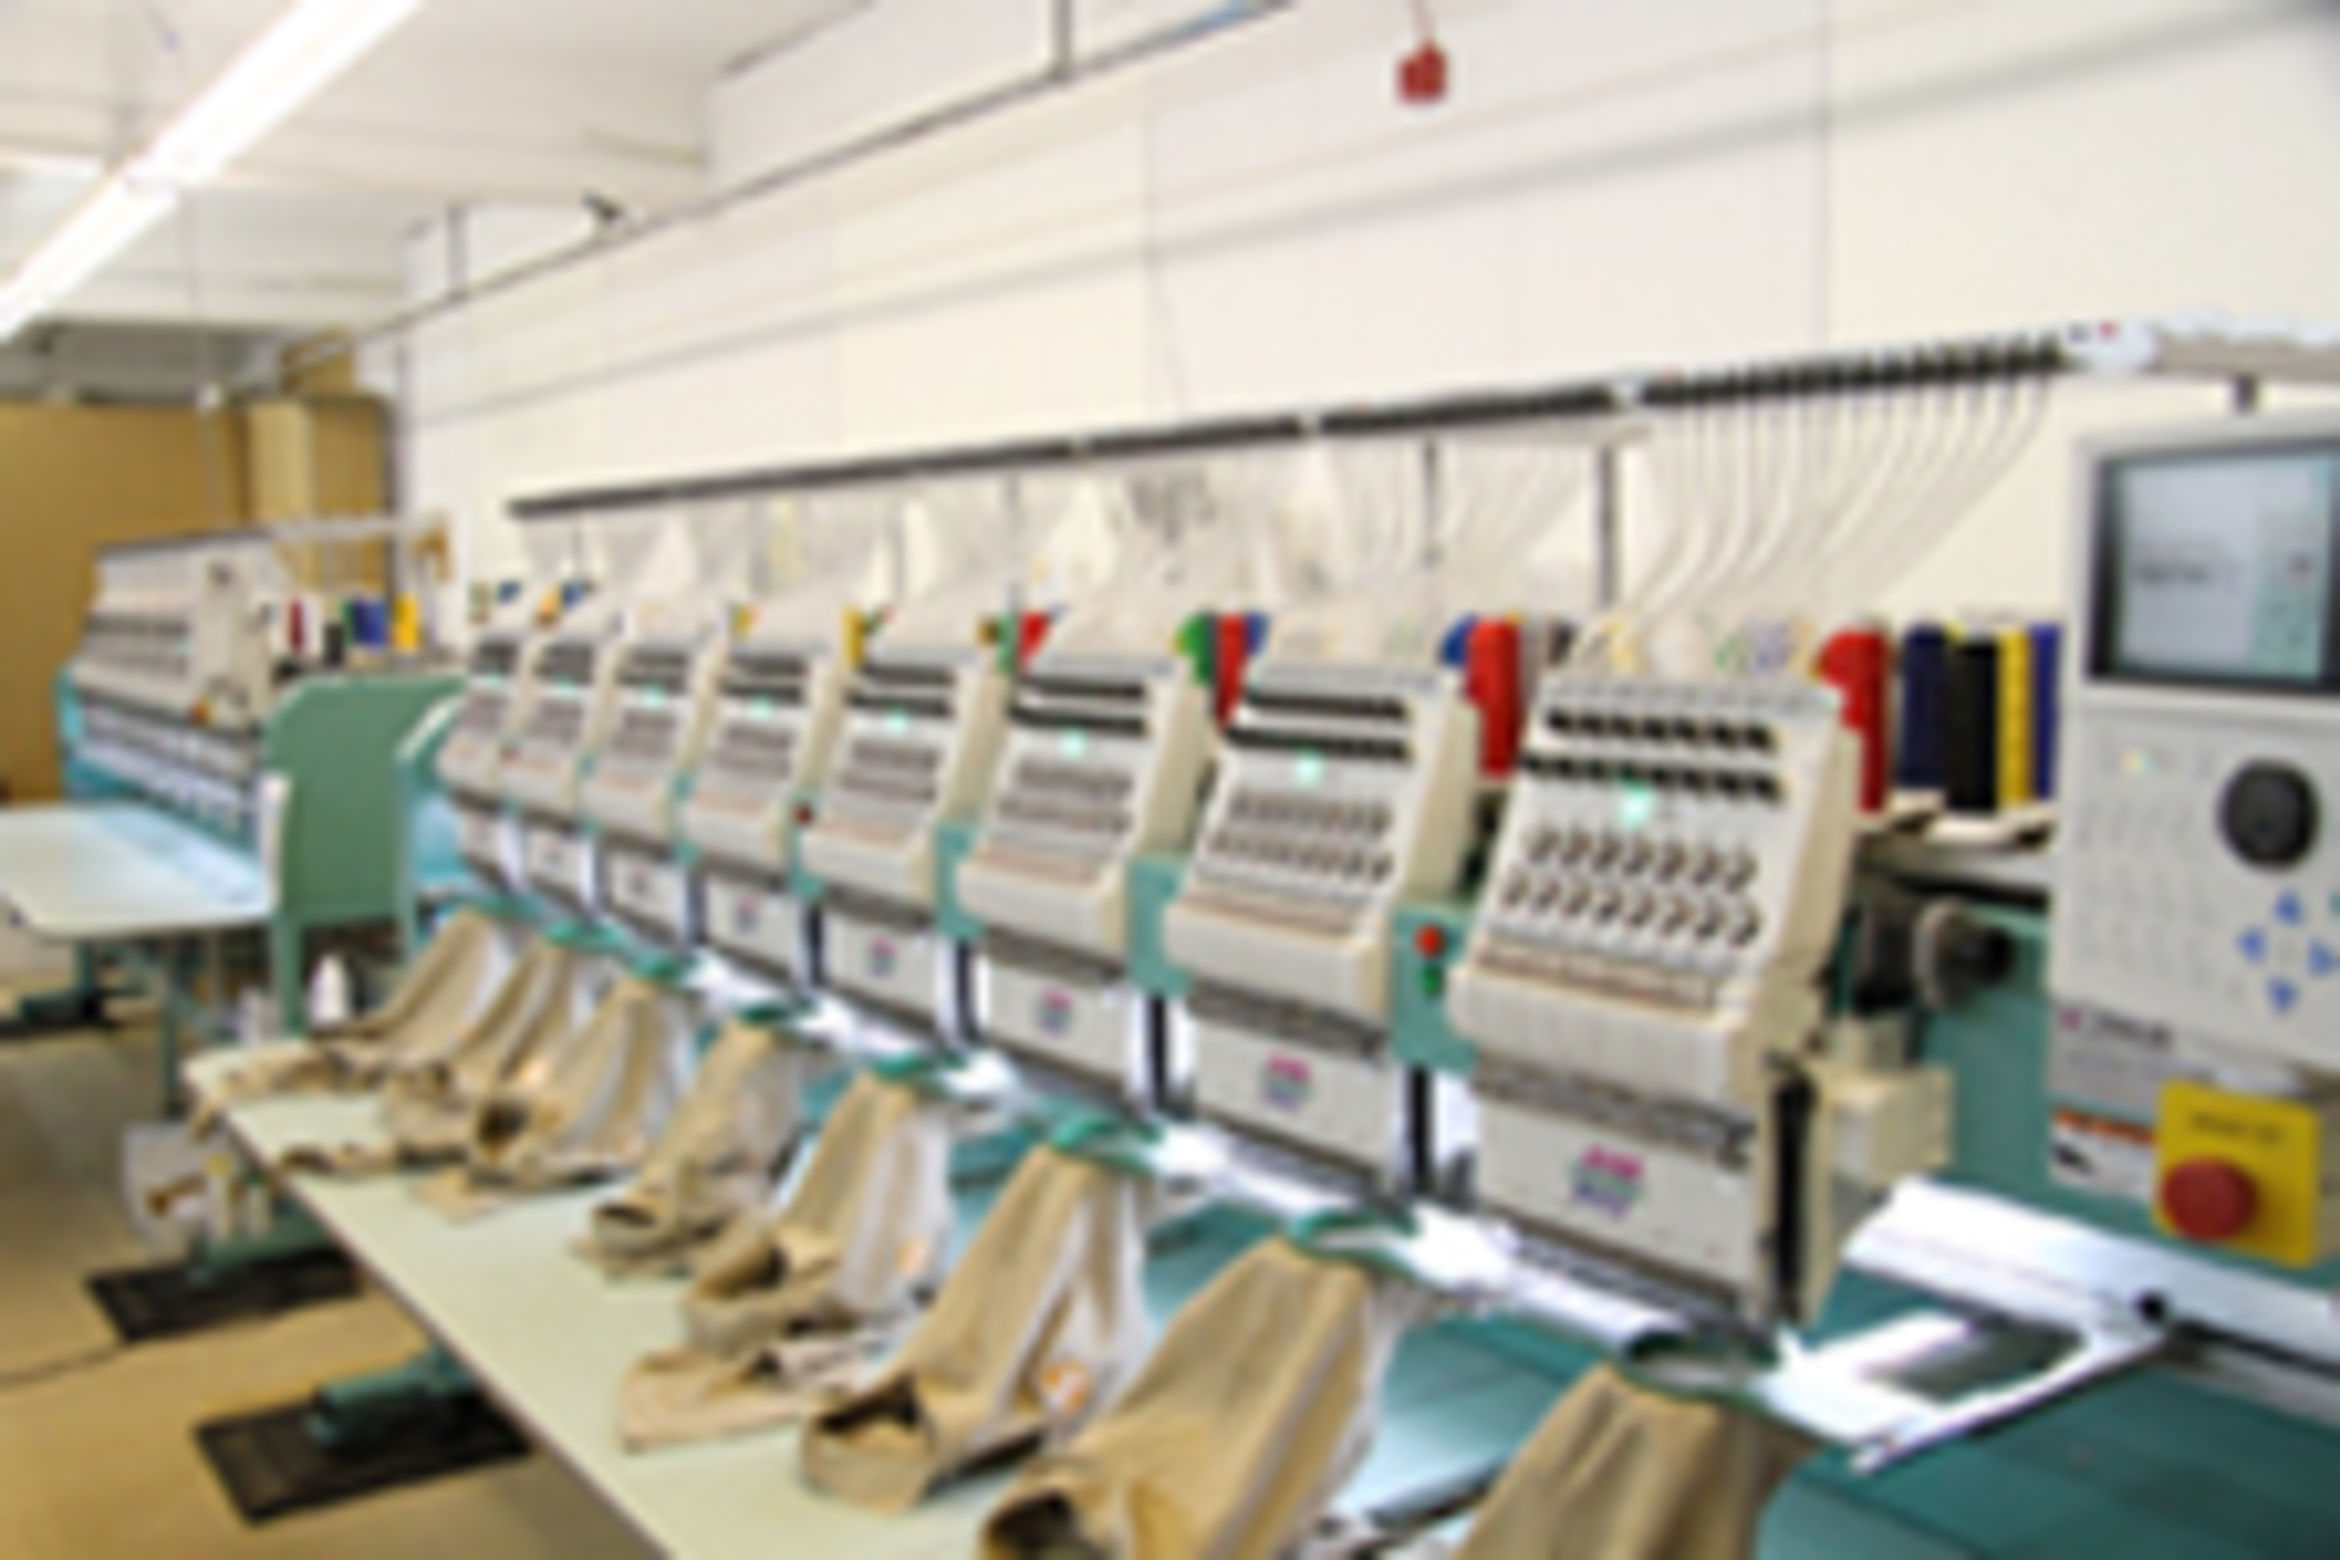 The EPCC only use Tajima embroidery machines, the best in the industry